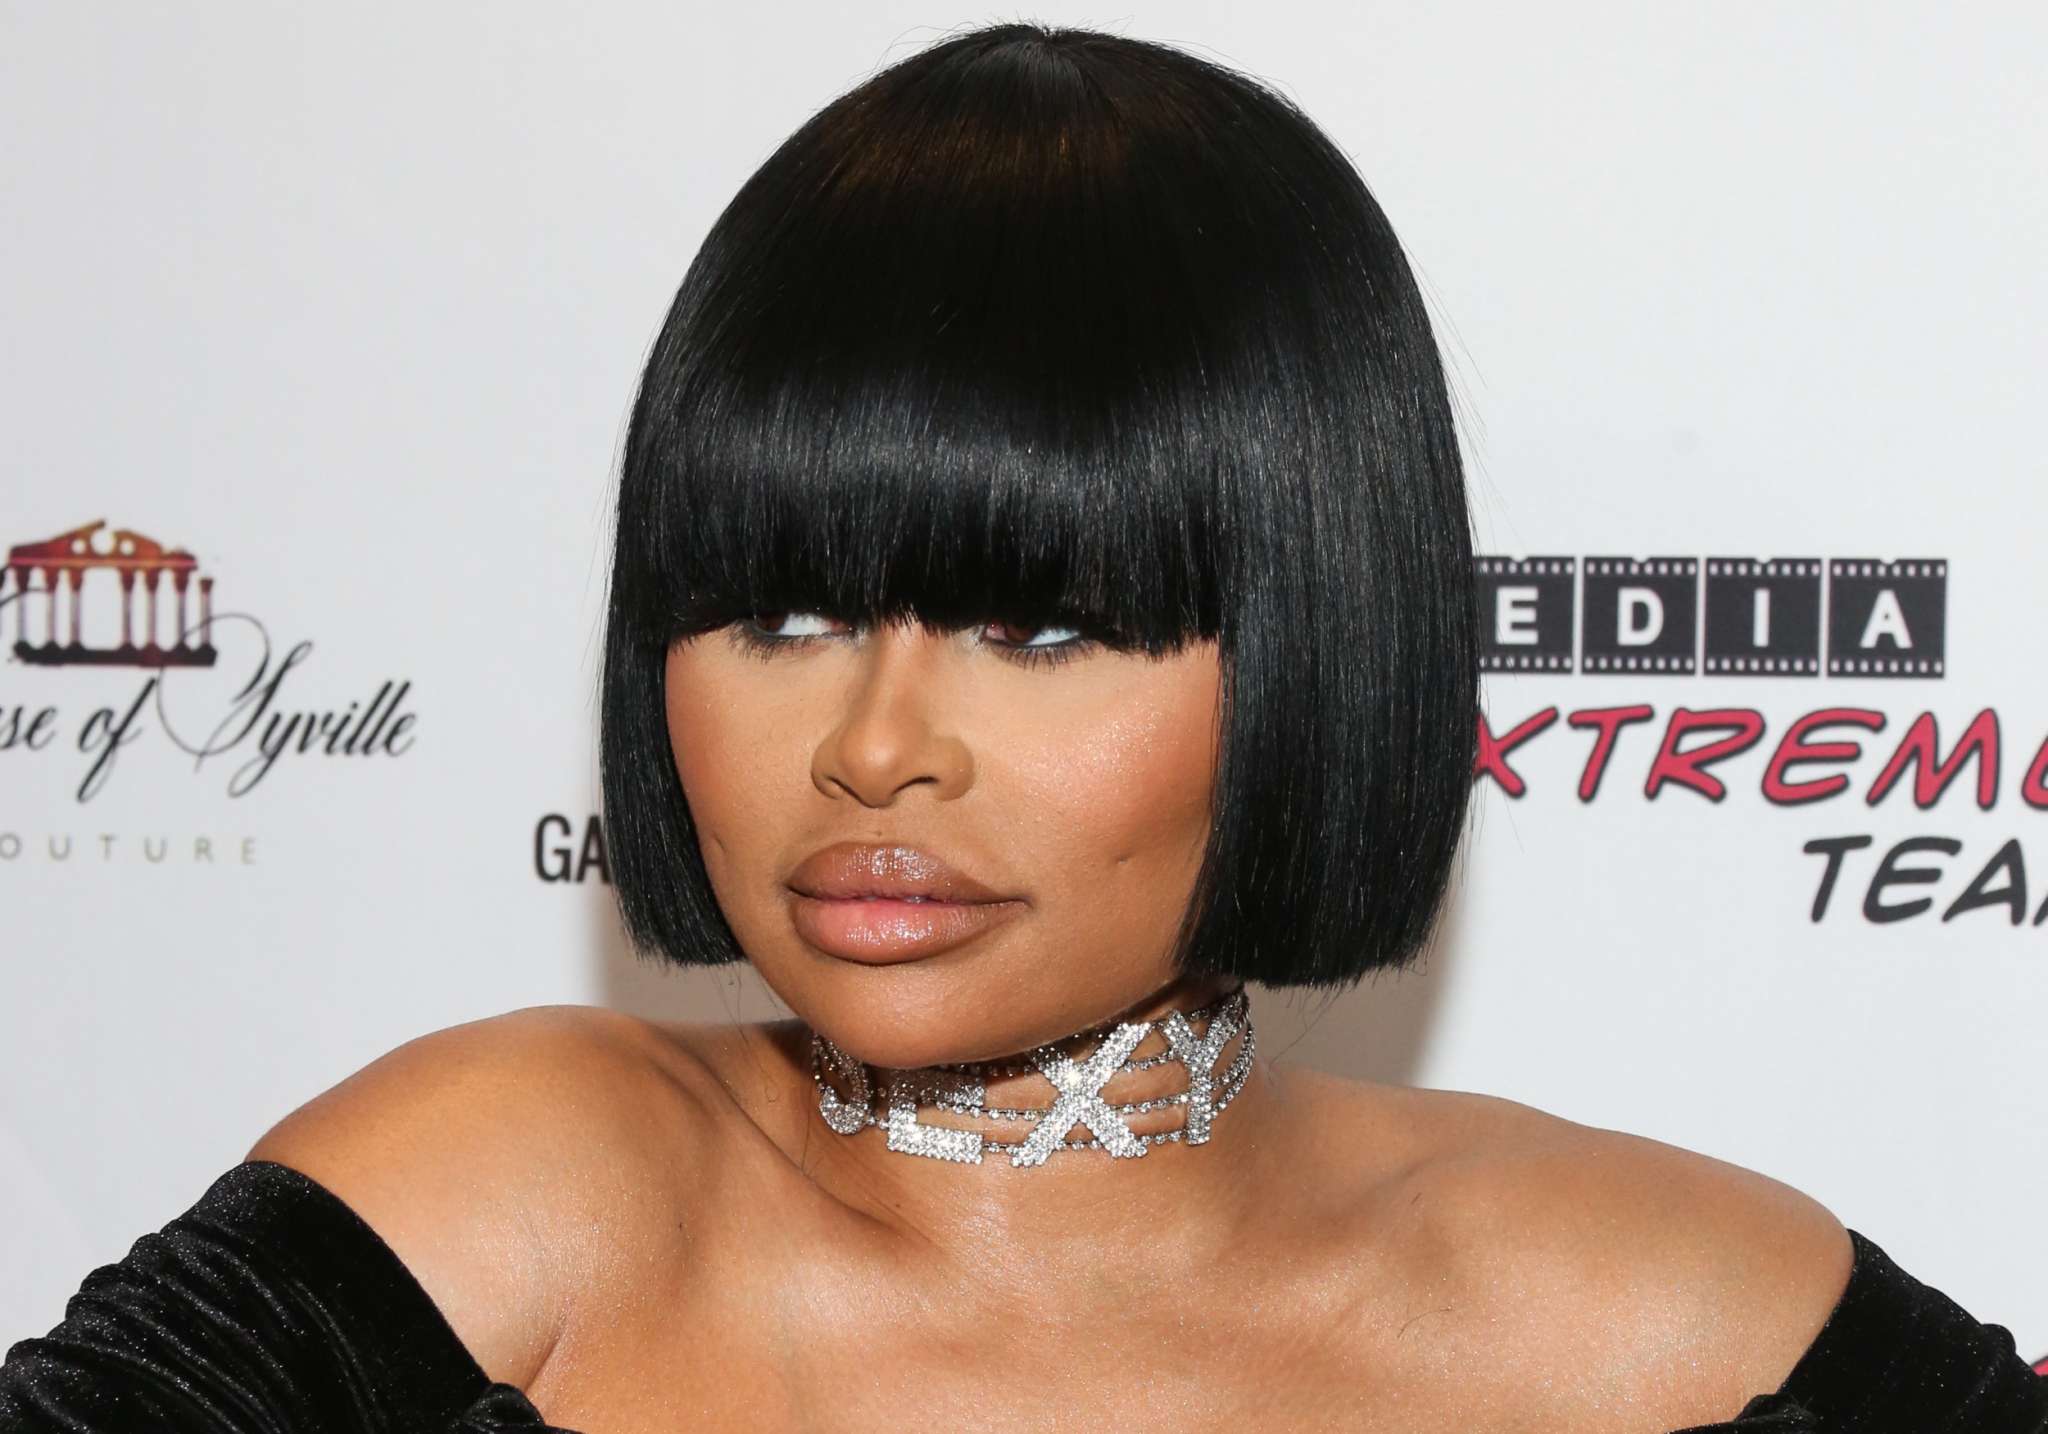 blac-chyna-is-investigated-for-battery-here-are-the-official-details